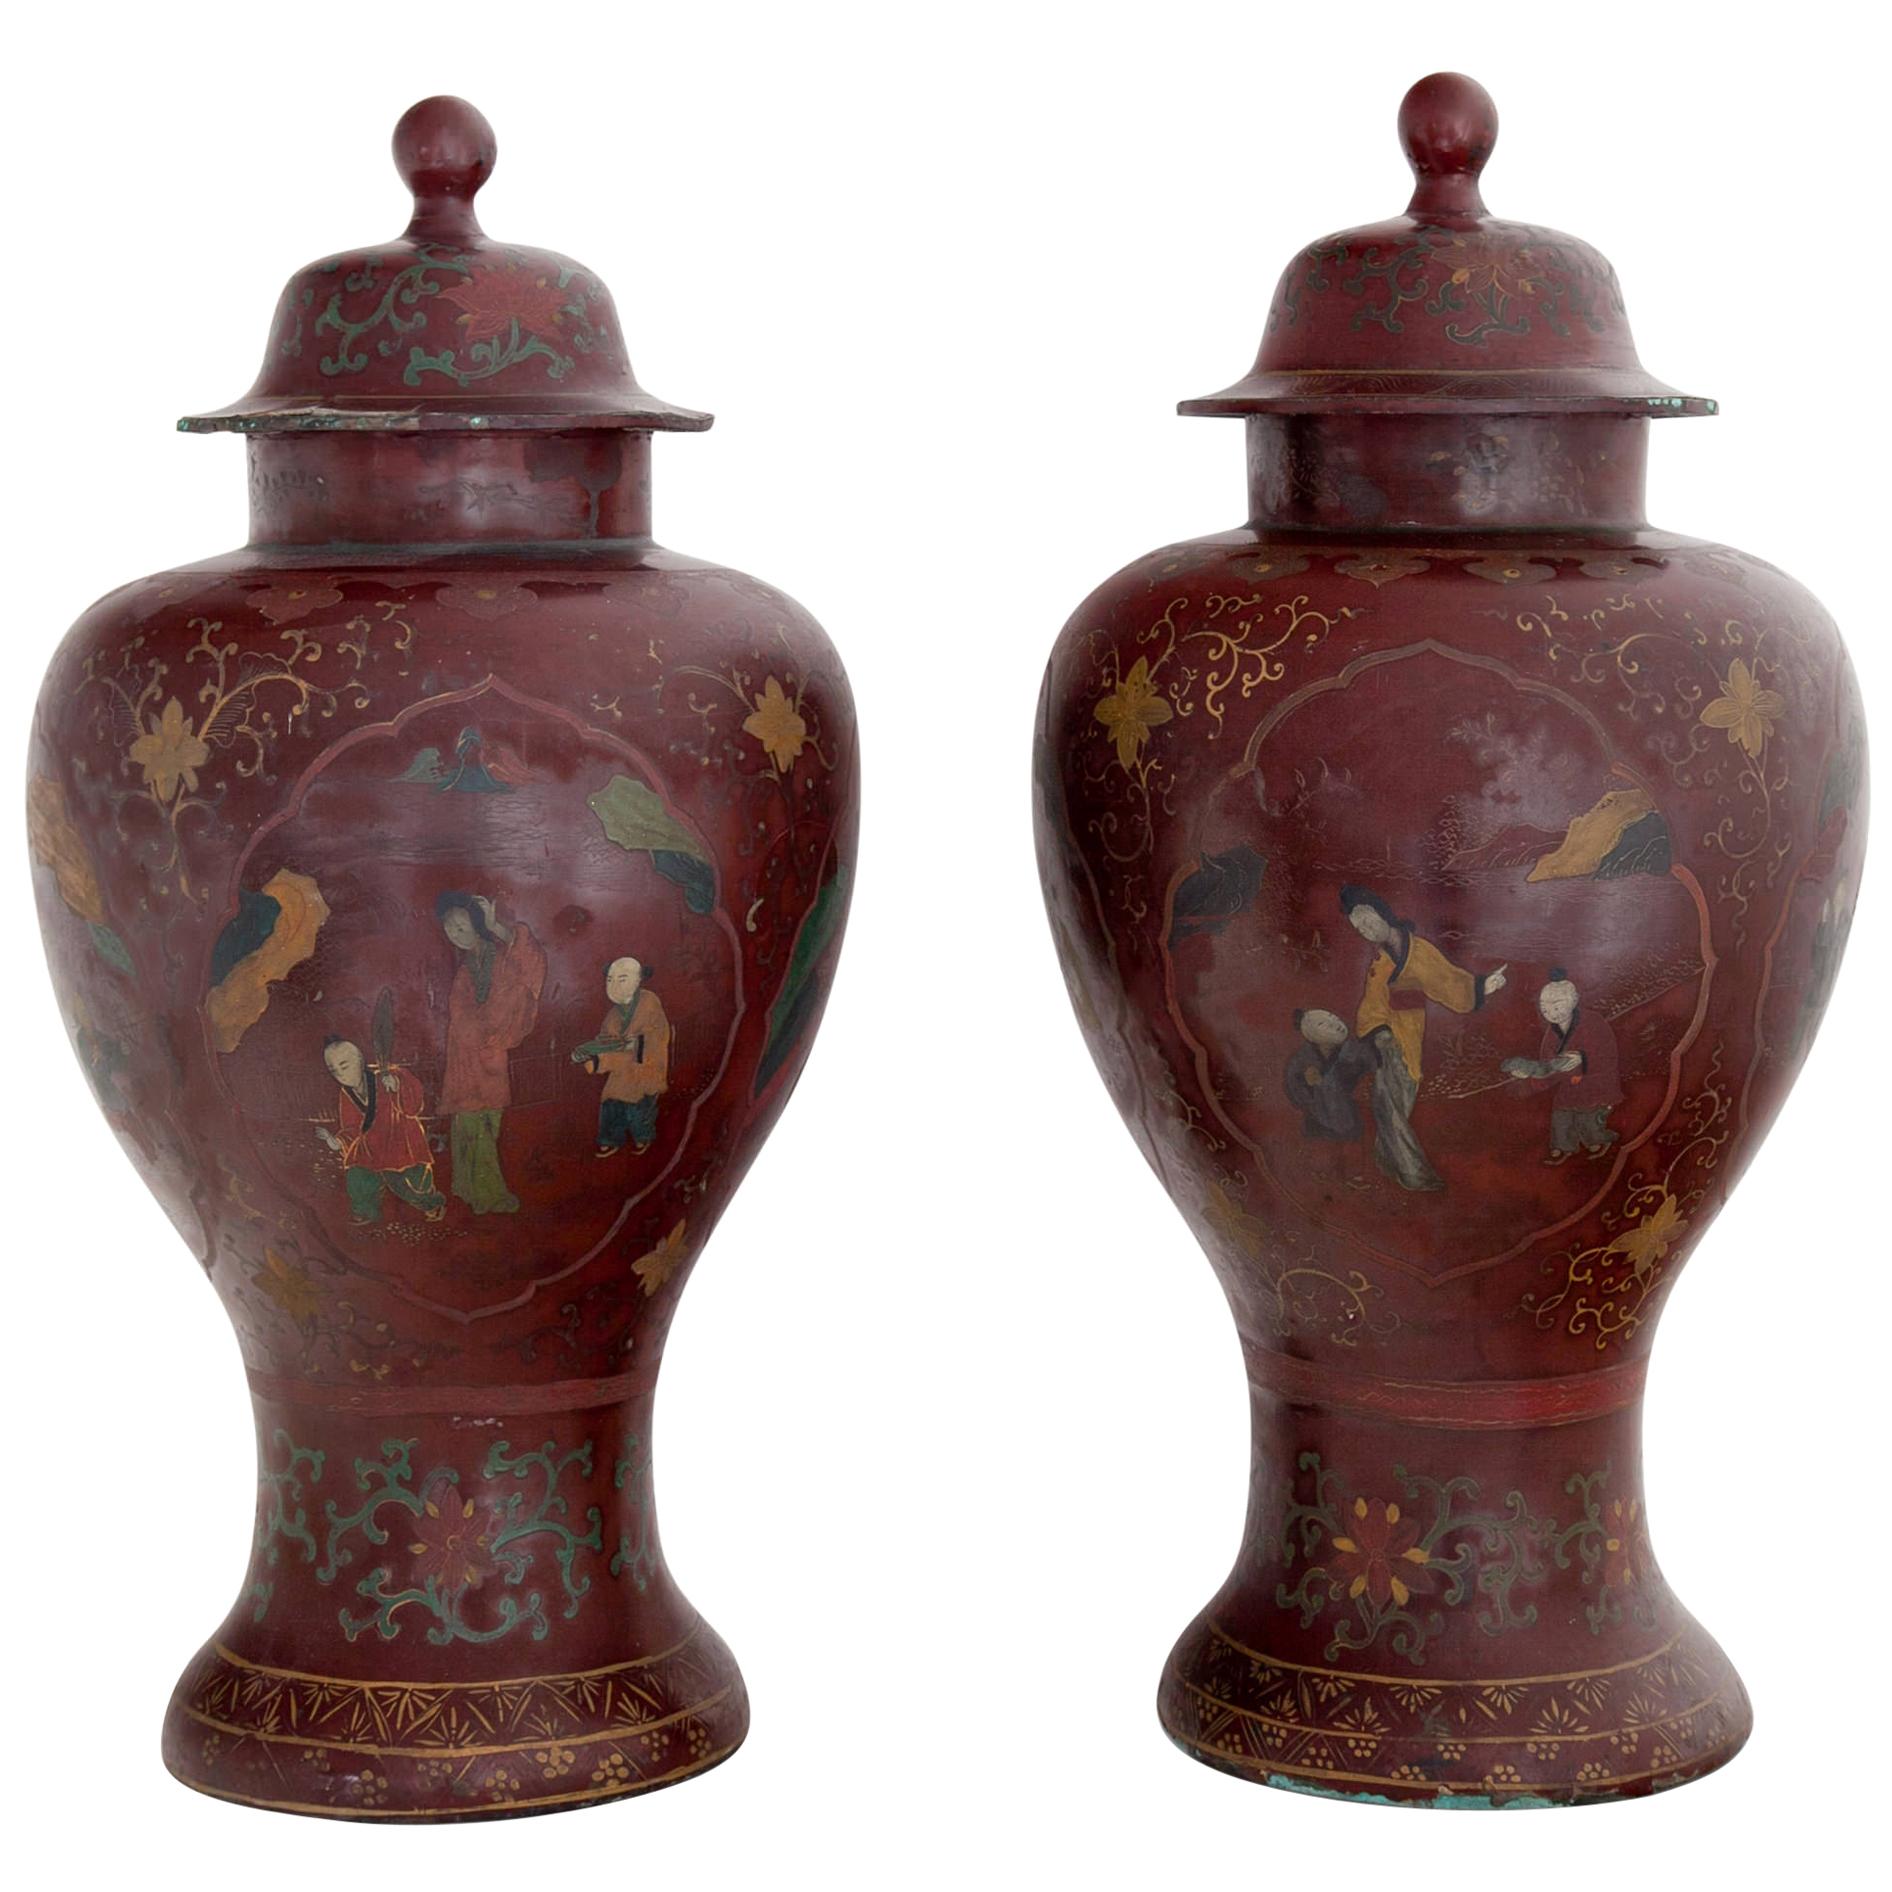 Chinoiserie Lidded Vases, Probably Berlin, Early 19th Century